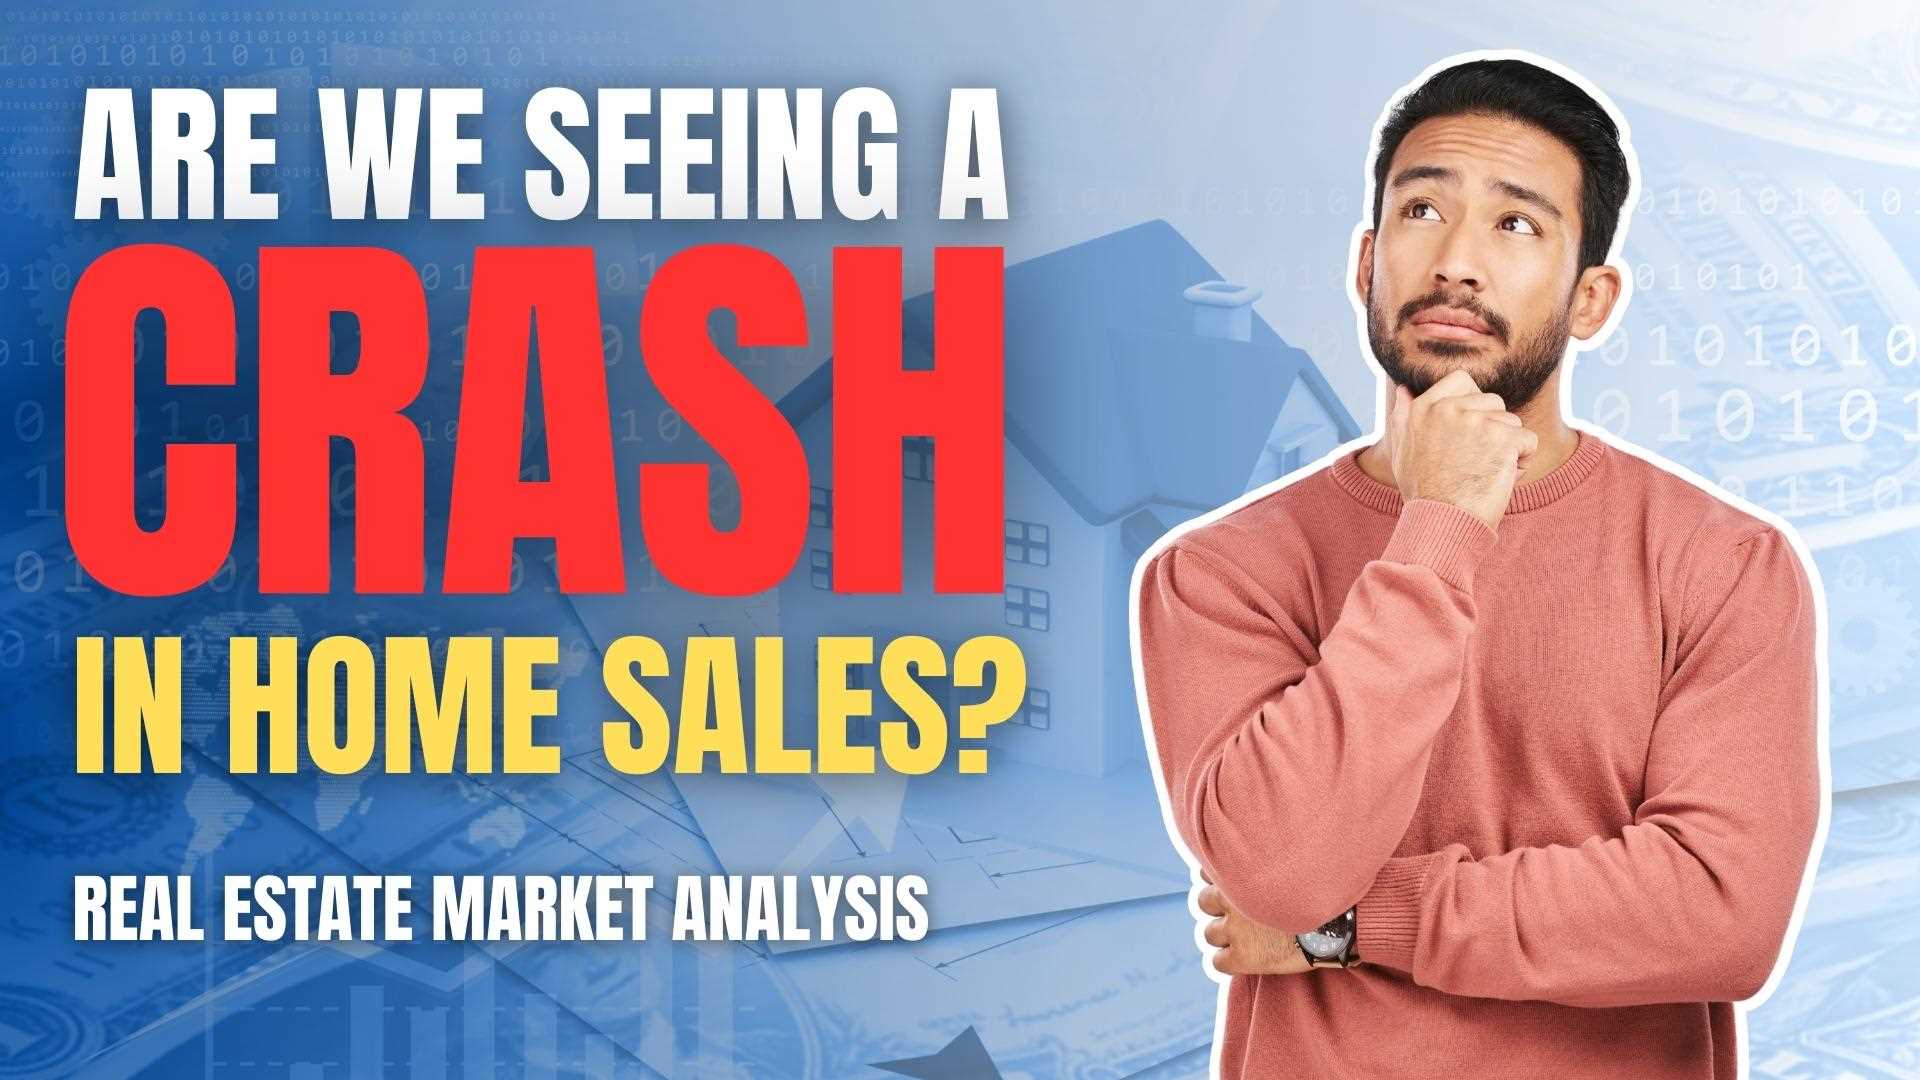 ARE WE SEEING A CRASH IN HOME SALES?